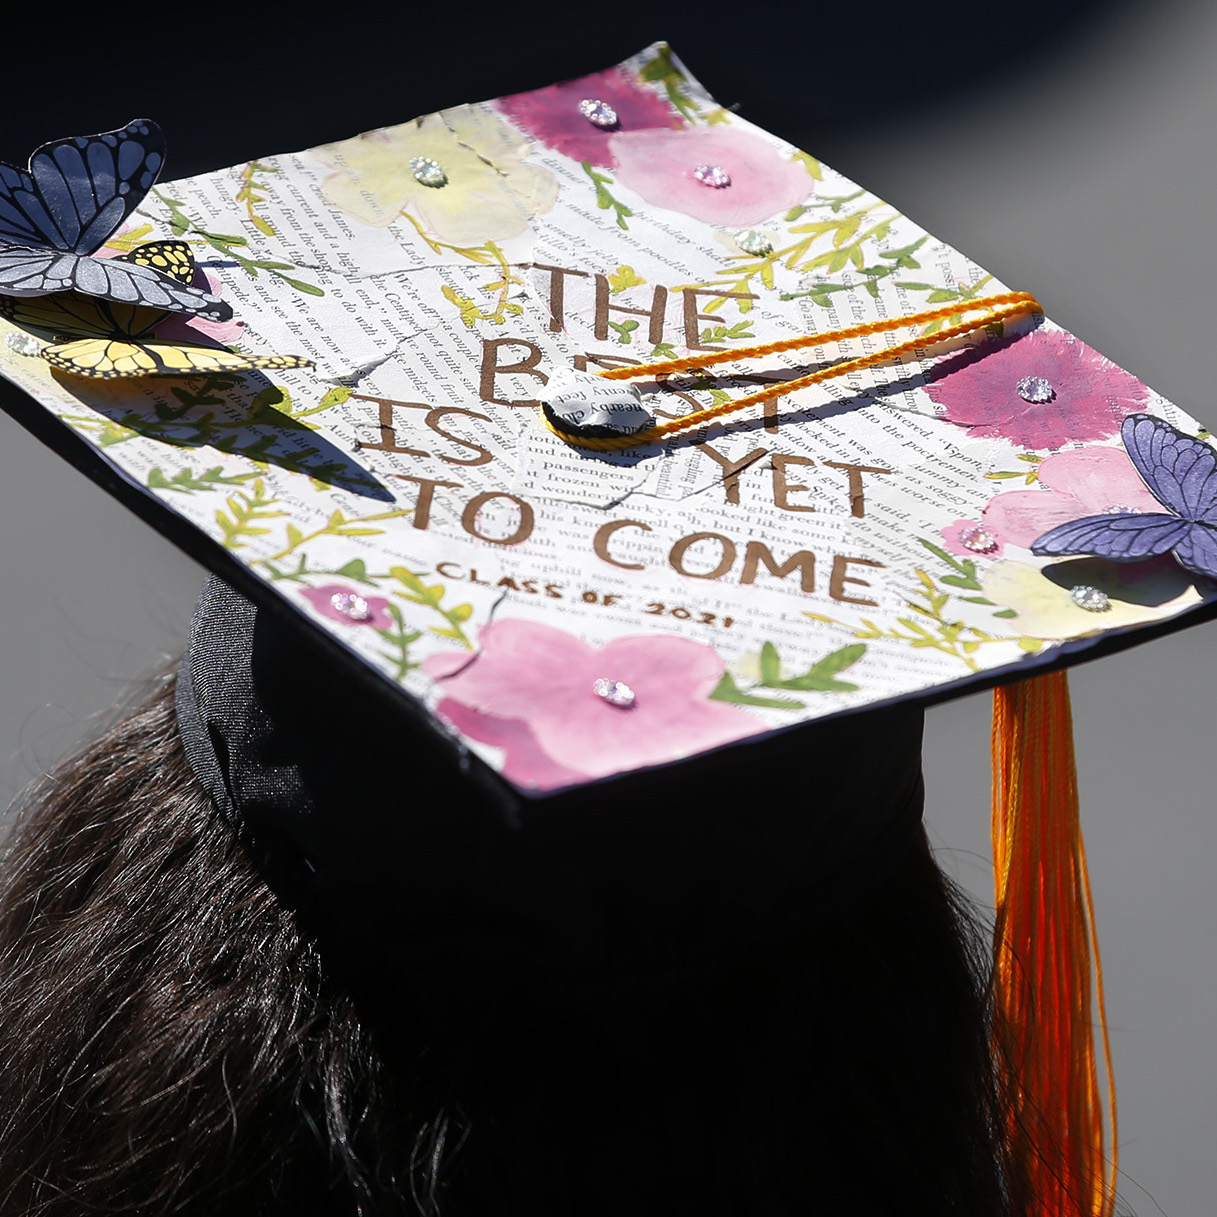 Grads Prepare for Their Day; May 23 Reception Added